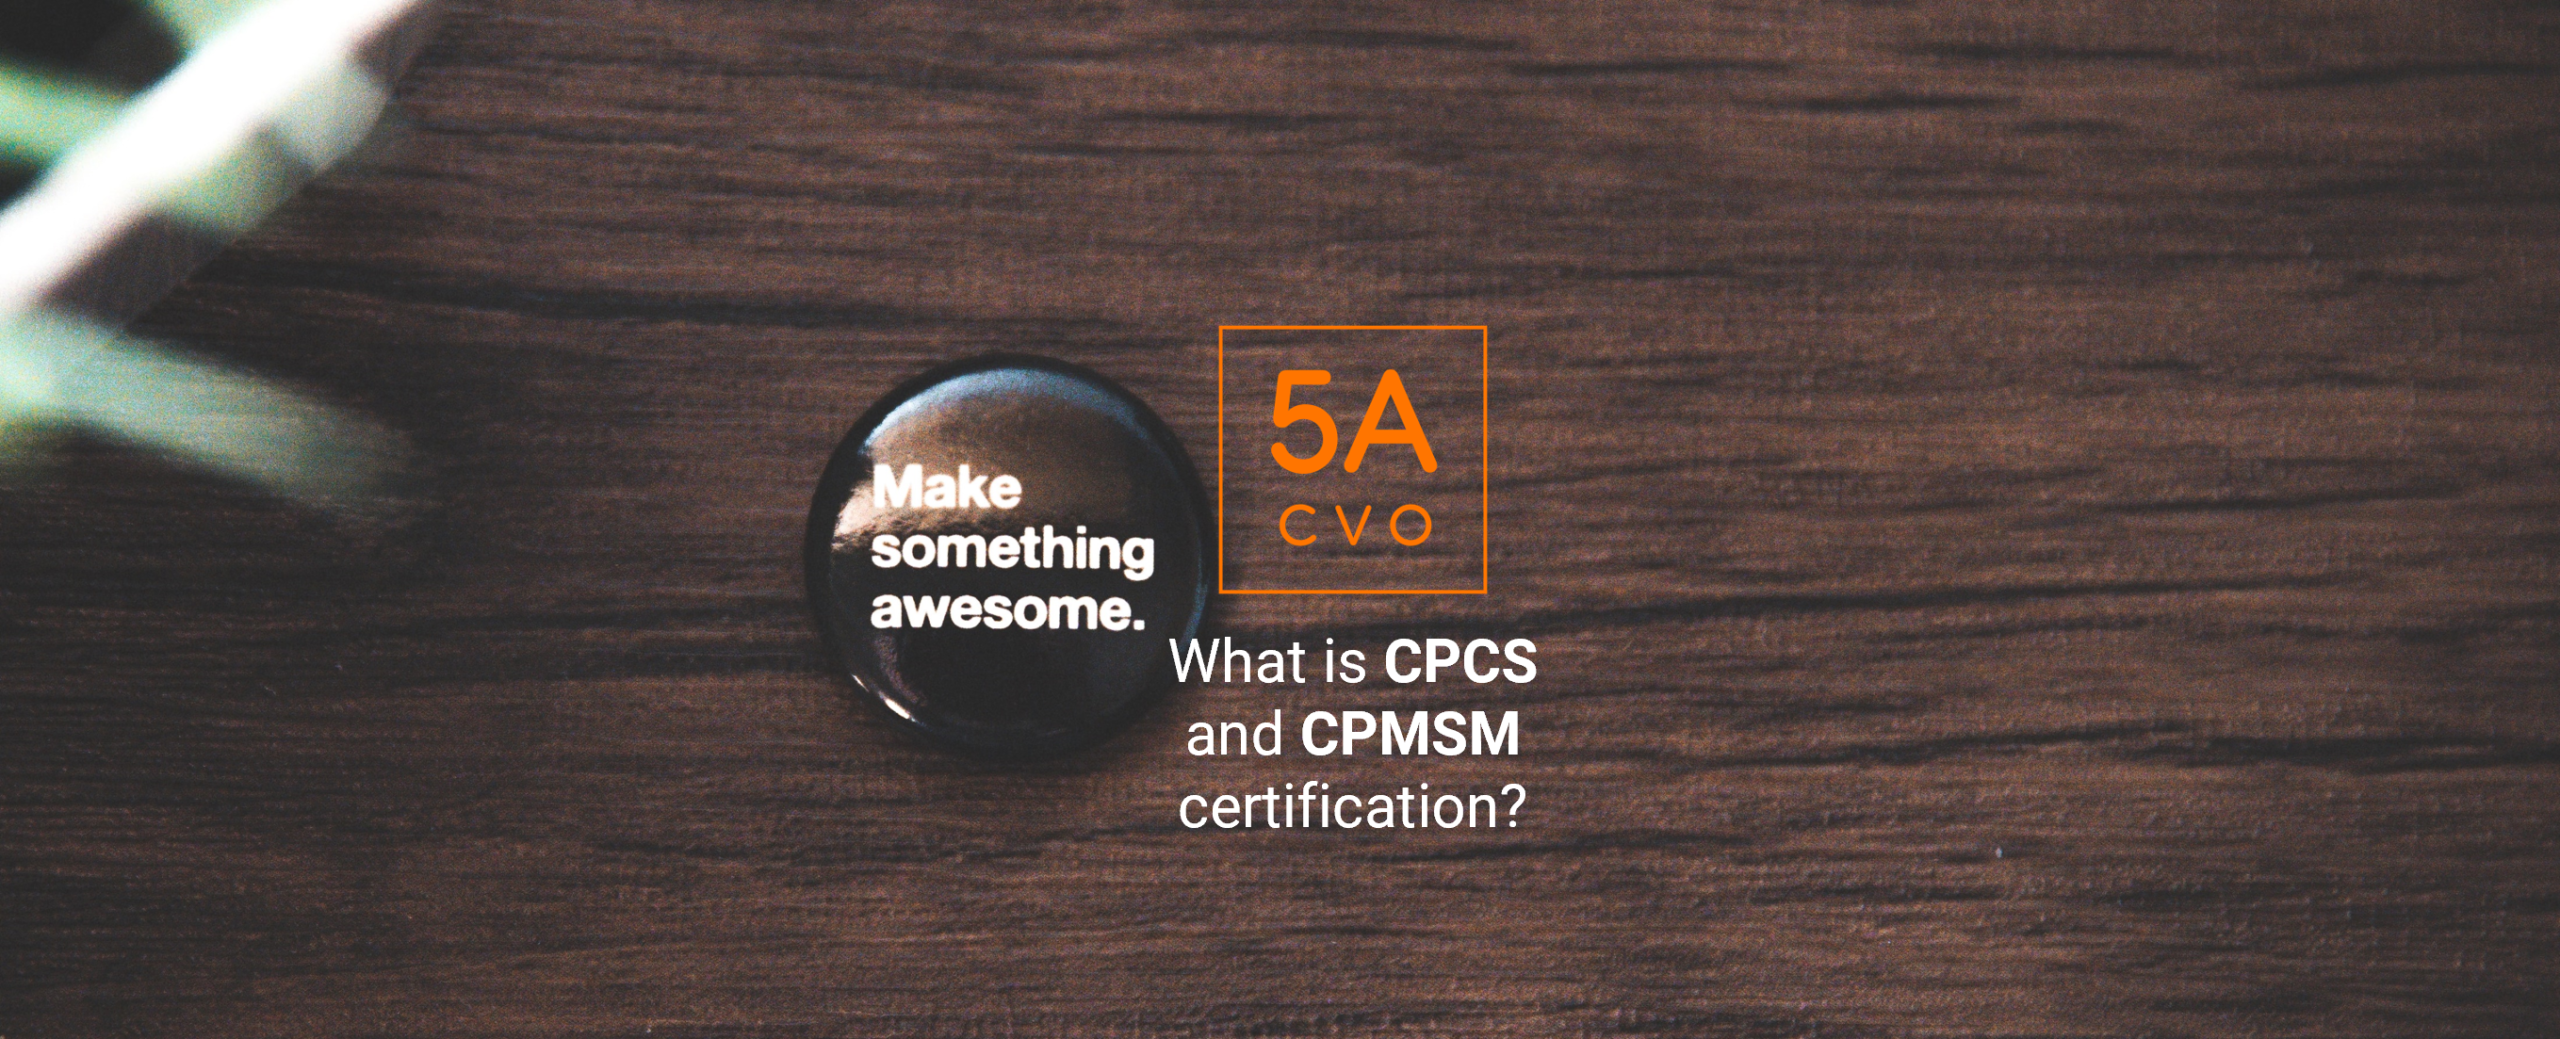 What is CPCS and CPMSM credentialing certification? How long does it take and how much does it cost?